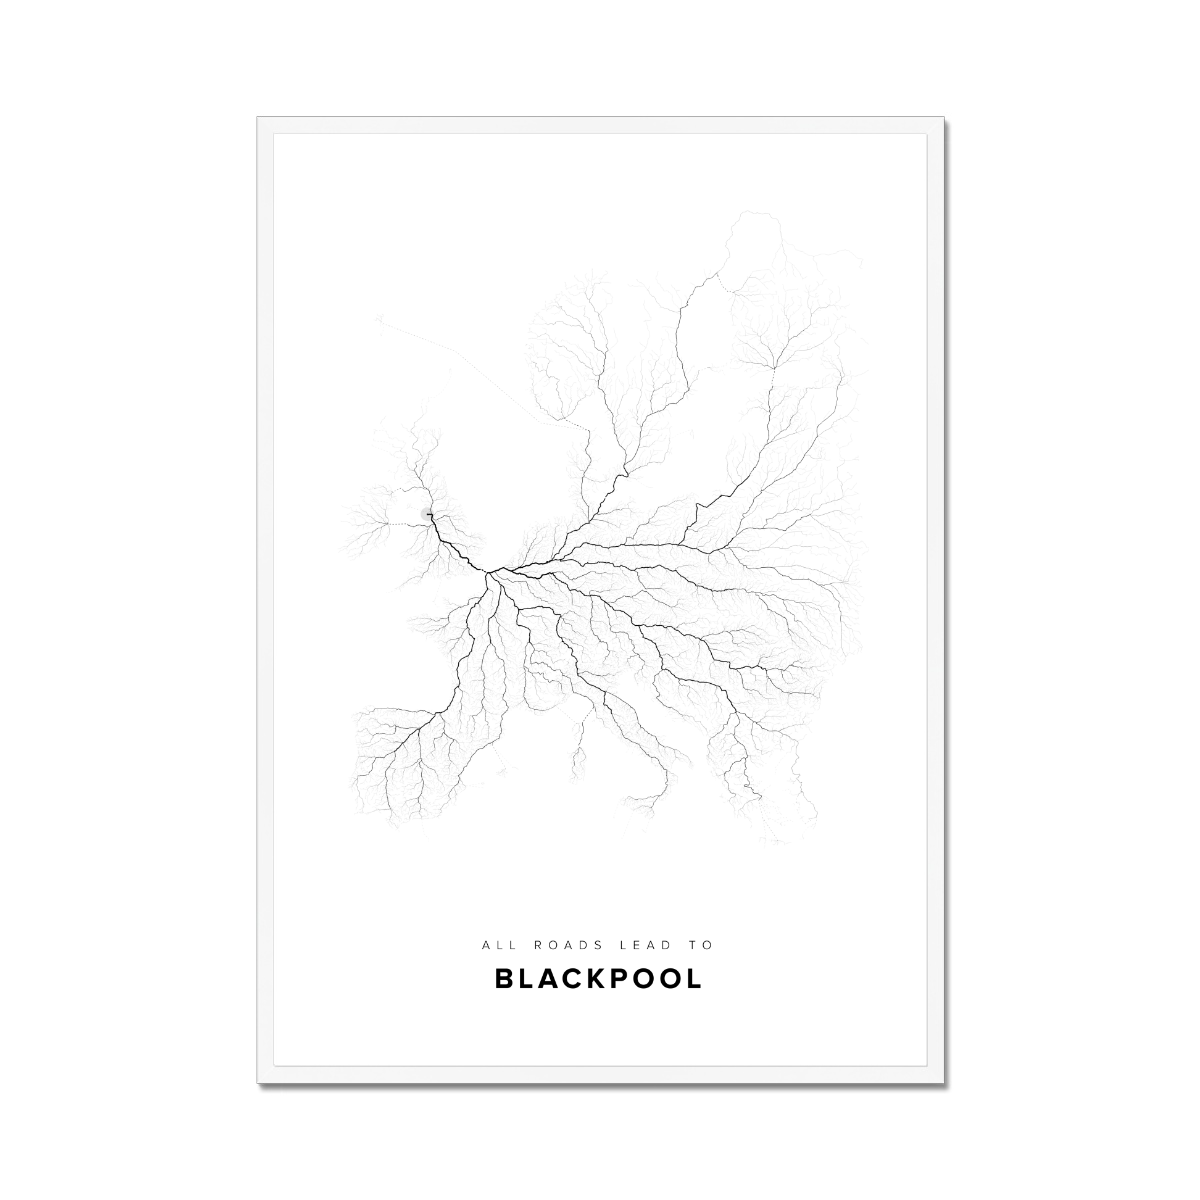 All roads lead to Blackpool (United Kingdom of Great Britain and Northern Ireland) Fine Art Map Print